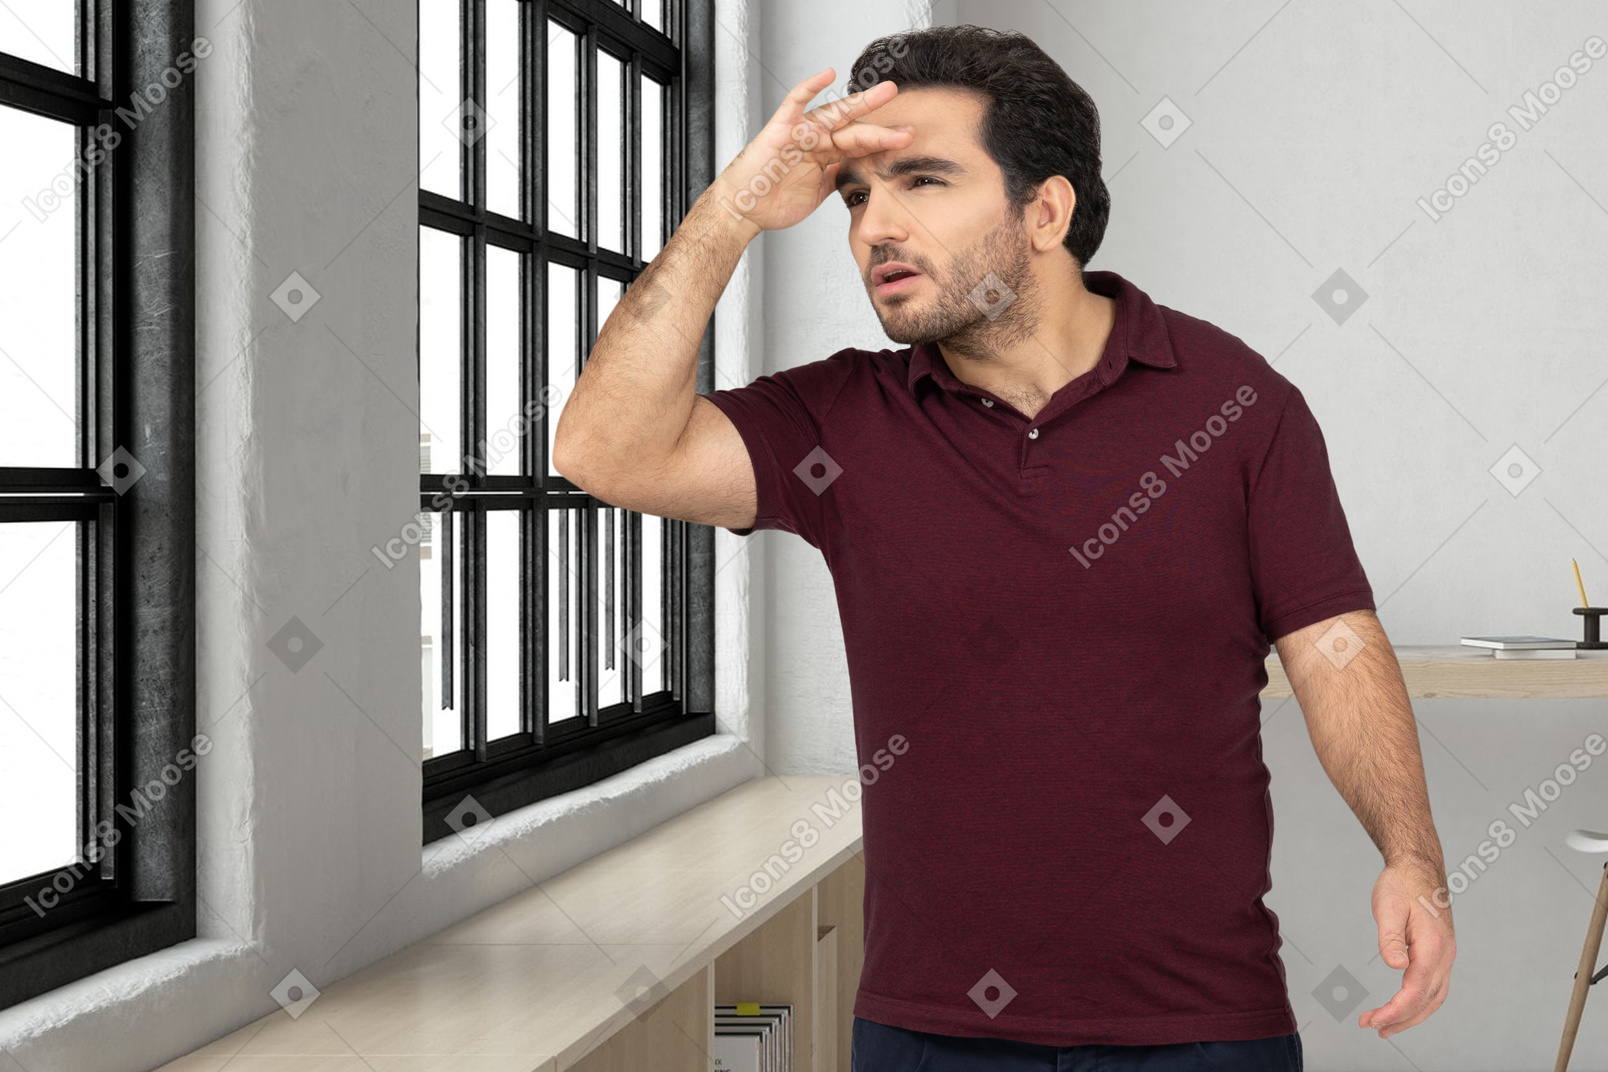 A man standing in front of a window and look into the distance